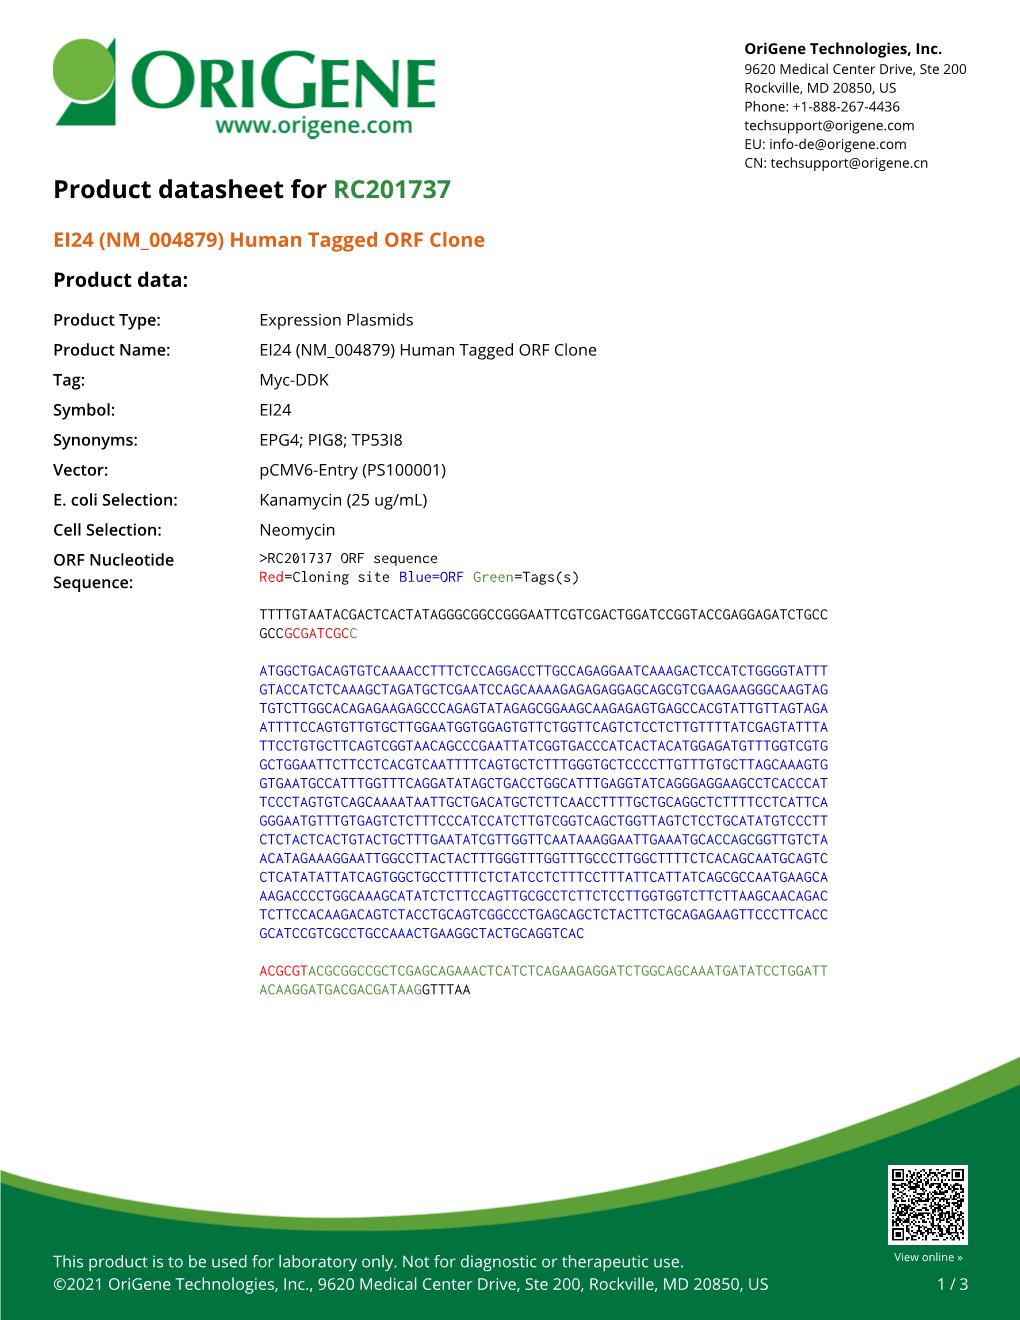 EI24 (NM 004879) Human Tagged ORF Clone Product Data